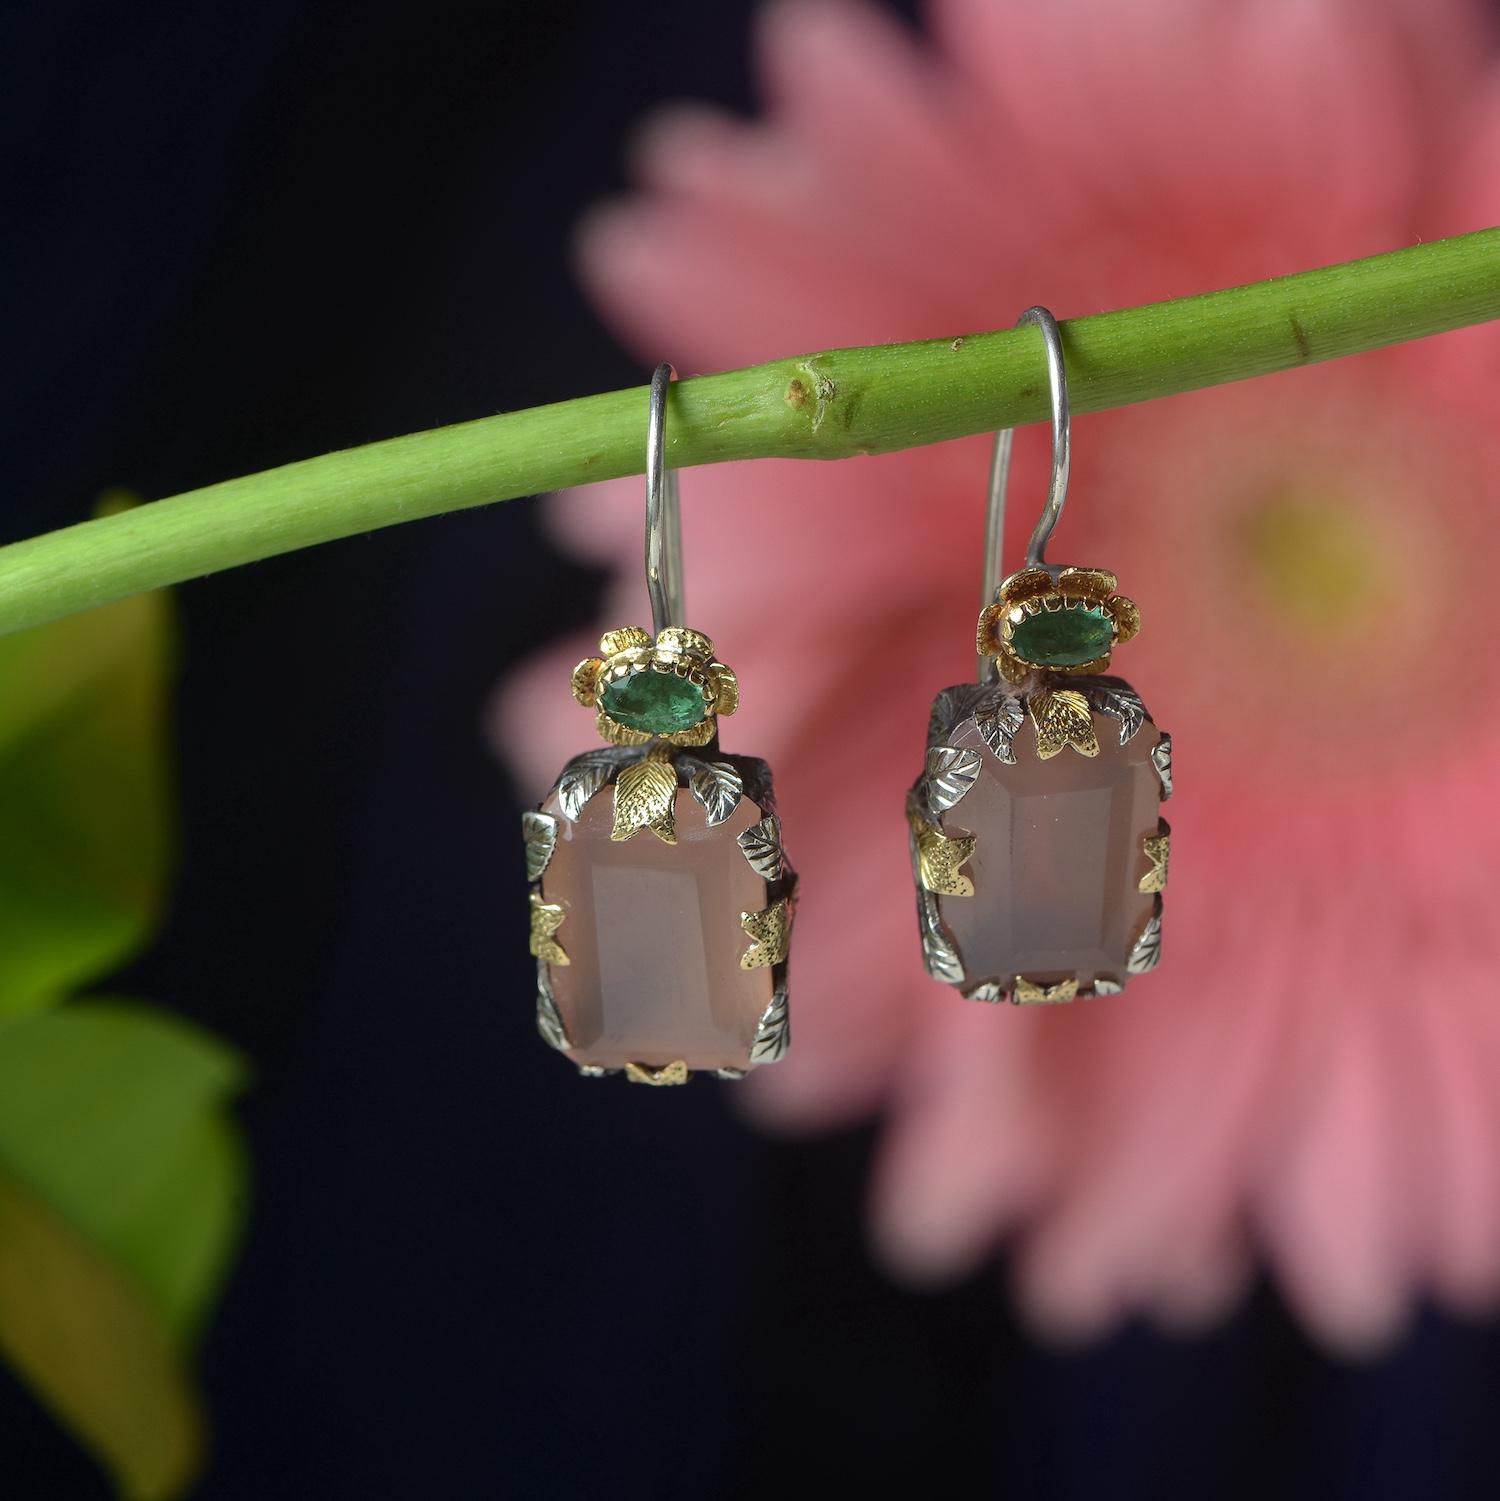 

These divine one-of-a-kind earrings have been handmade in our workshops. They feature hand cut rose quartz capped with emeralds, which are set in 18k gold and oxidized hand-engraved leaf motifs. The earrings have a safety catch at the back.

They